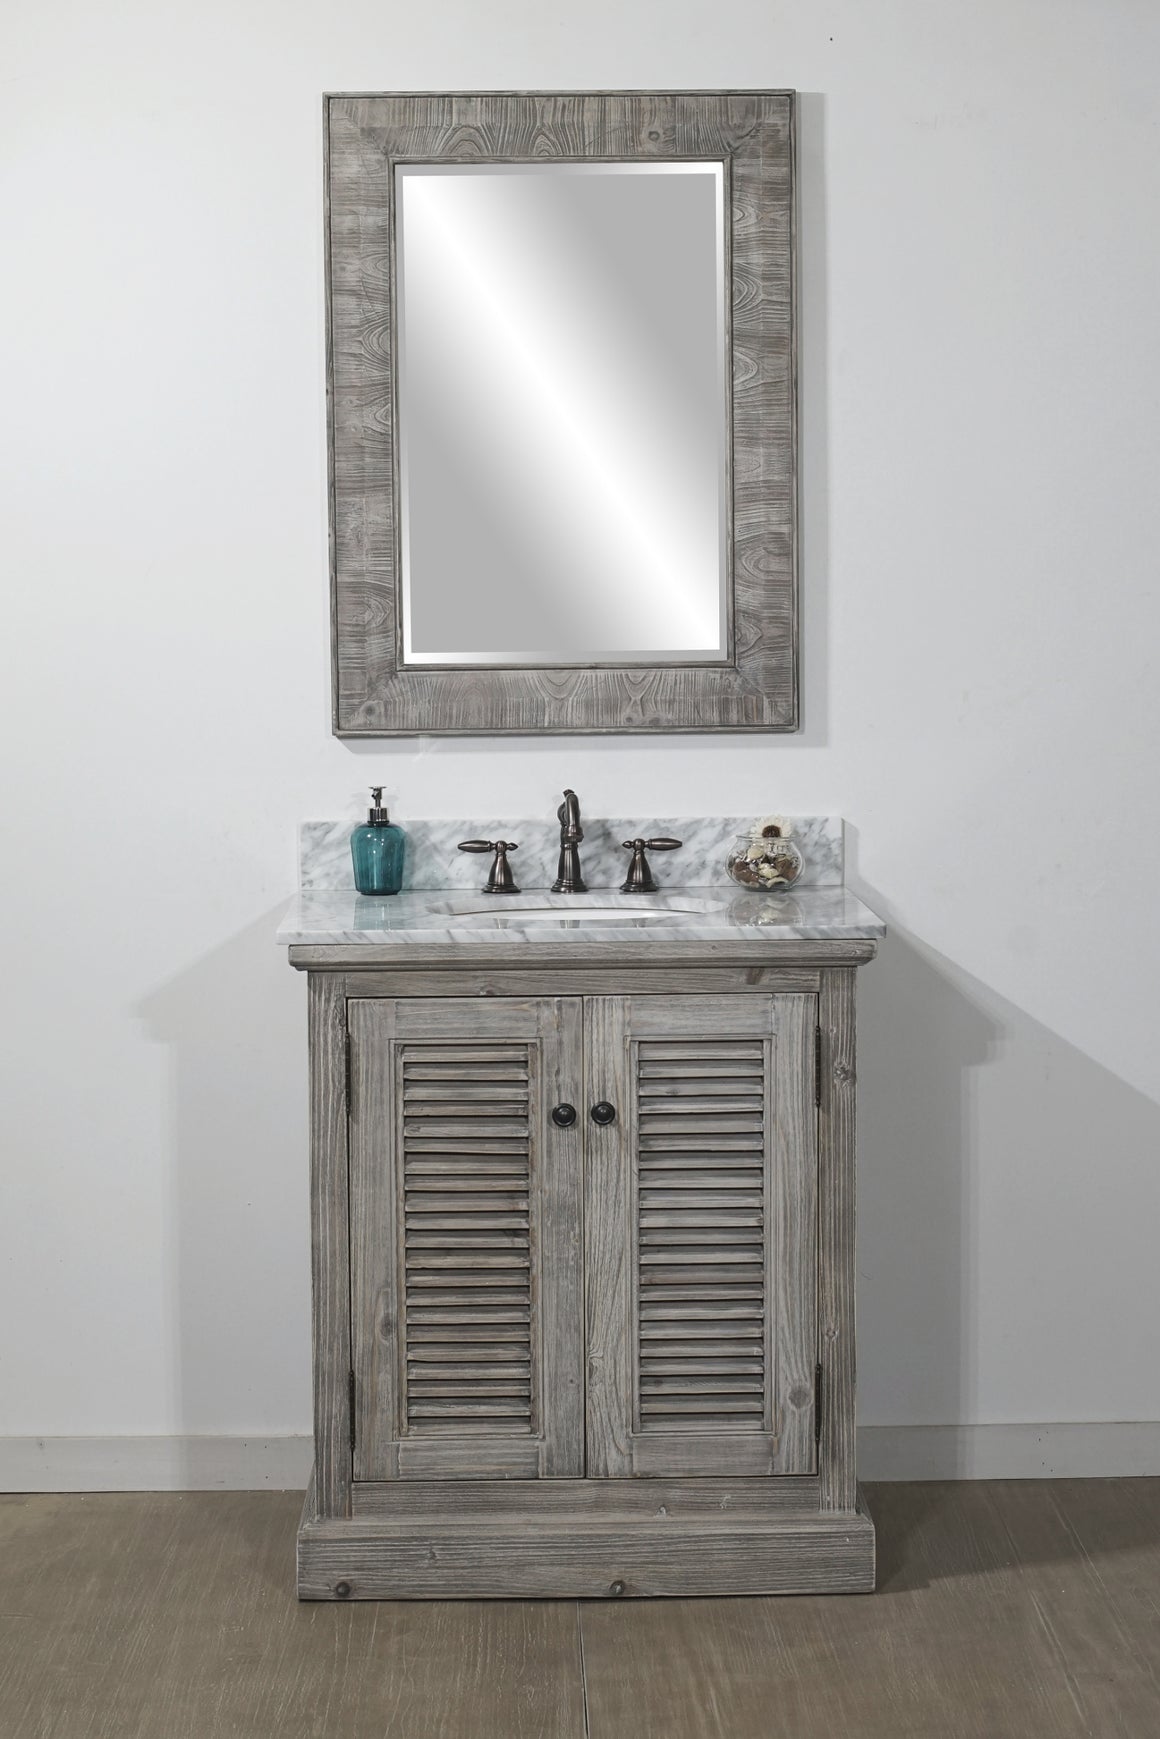 30" RUSTIC SOLID FIR SINGLE SINK VANITY IN GREY DRIFTWOOD WITH CARRARA WHITE MARBLE TOP-NO FAUCET